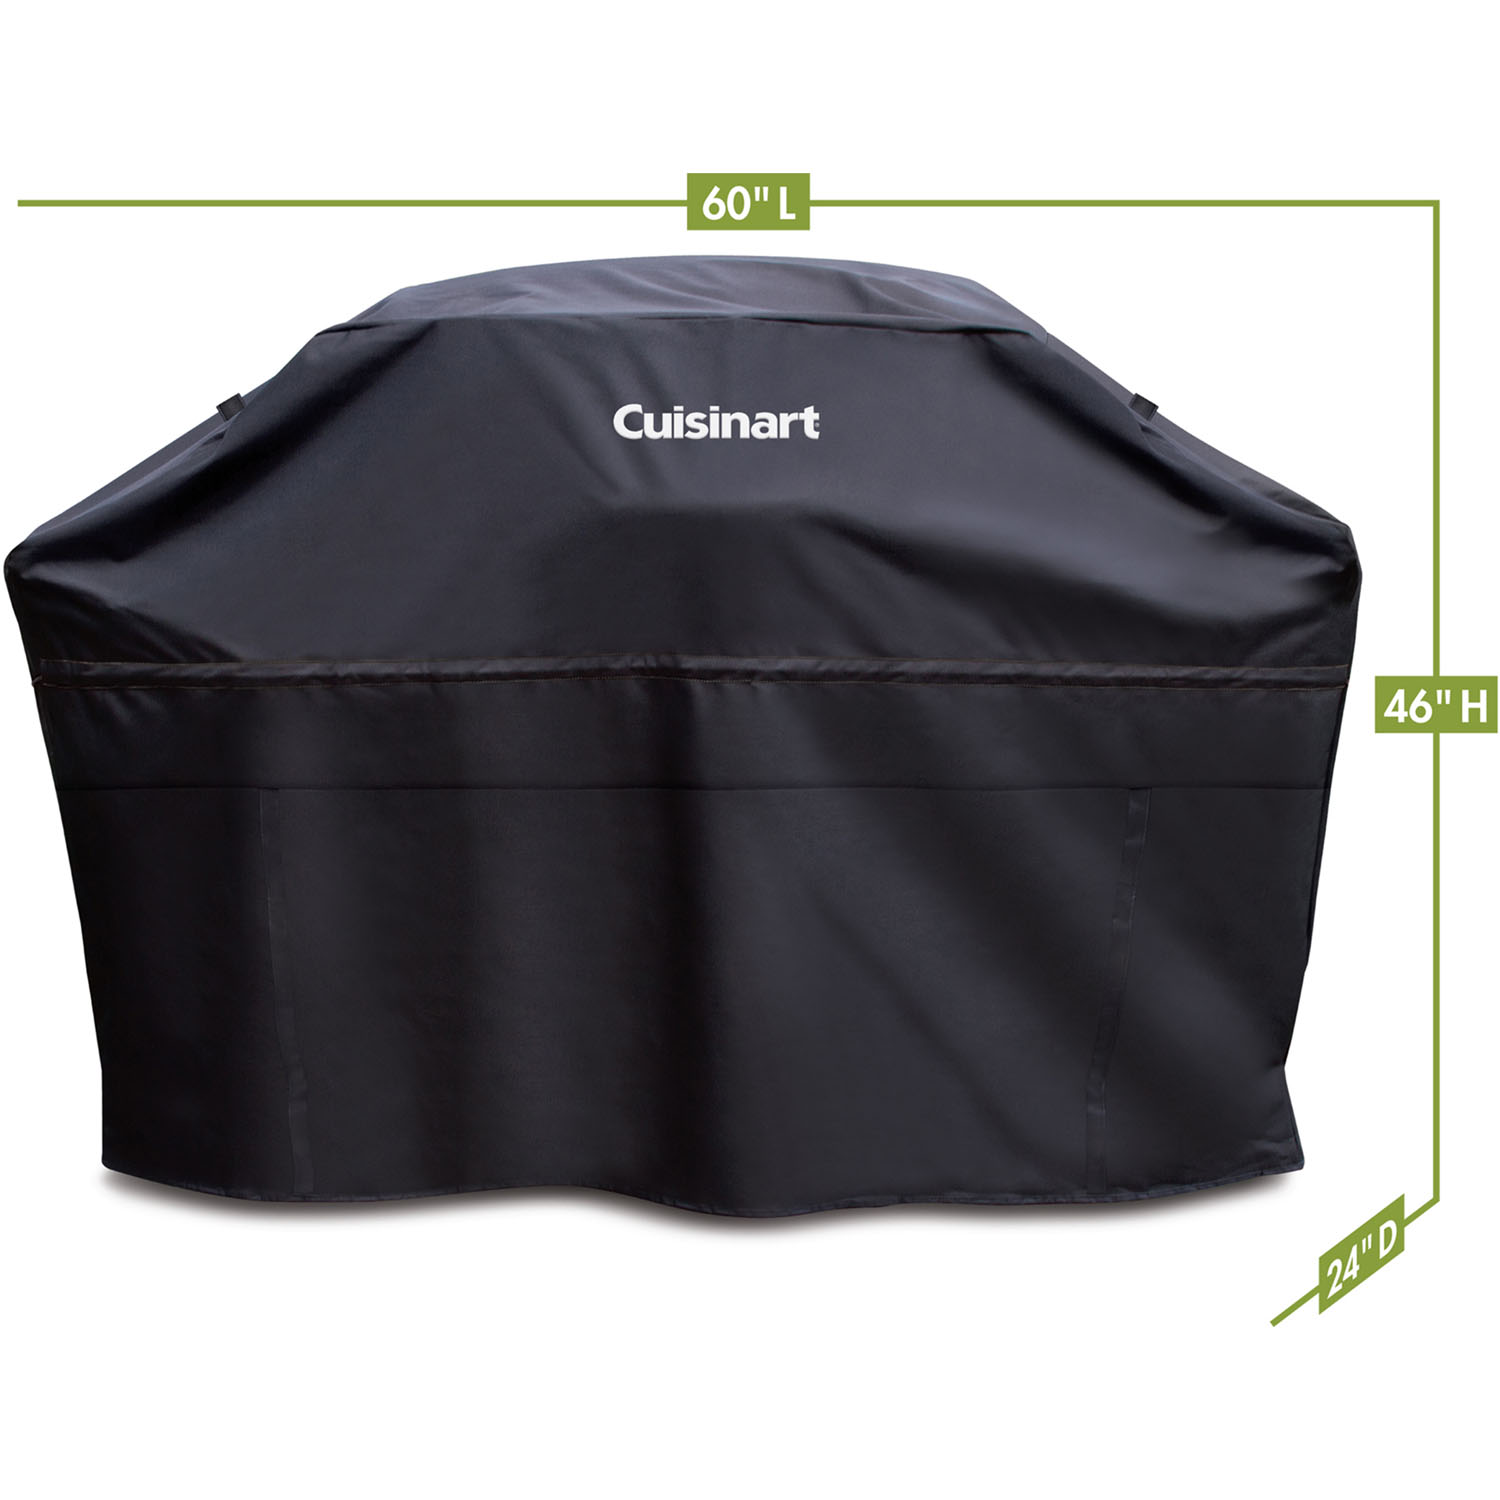 Cuisinart 60-In. Heavy-Duty Rectangular Grill Cover in Black - image 2 of 11